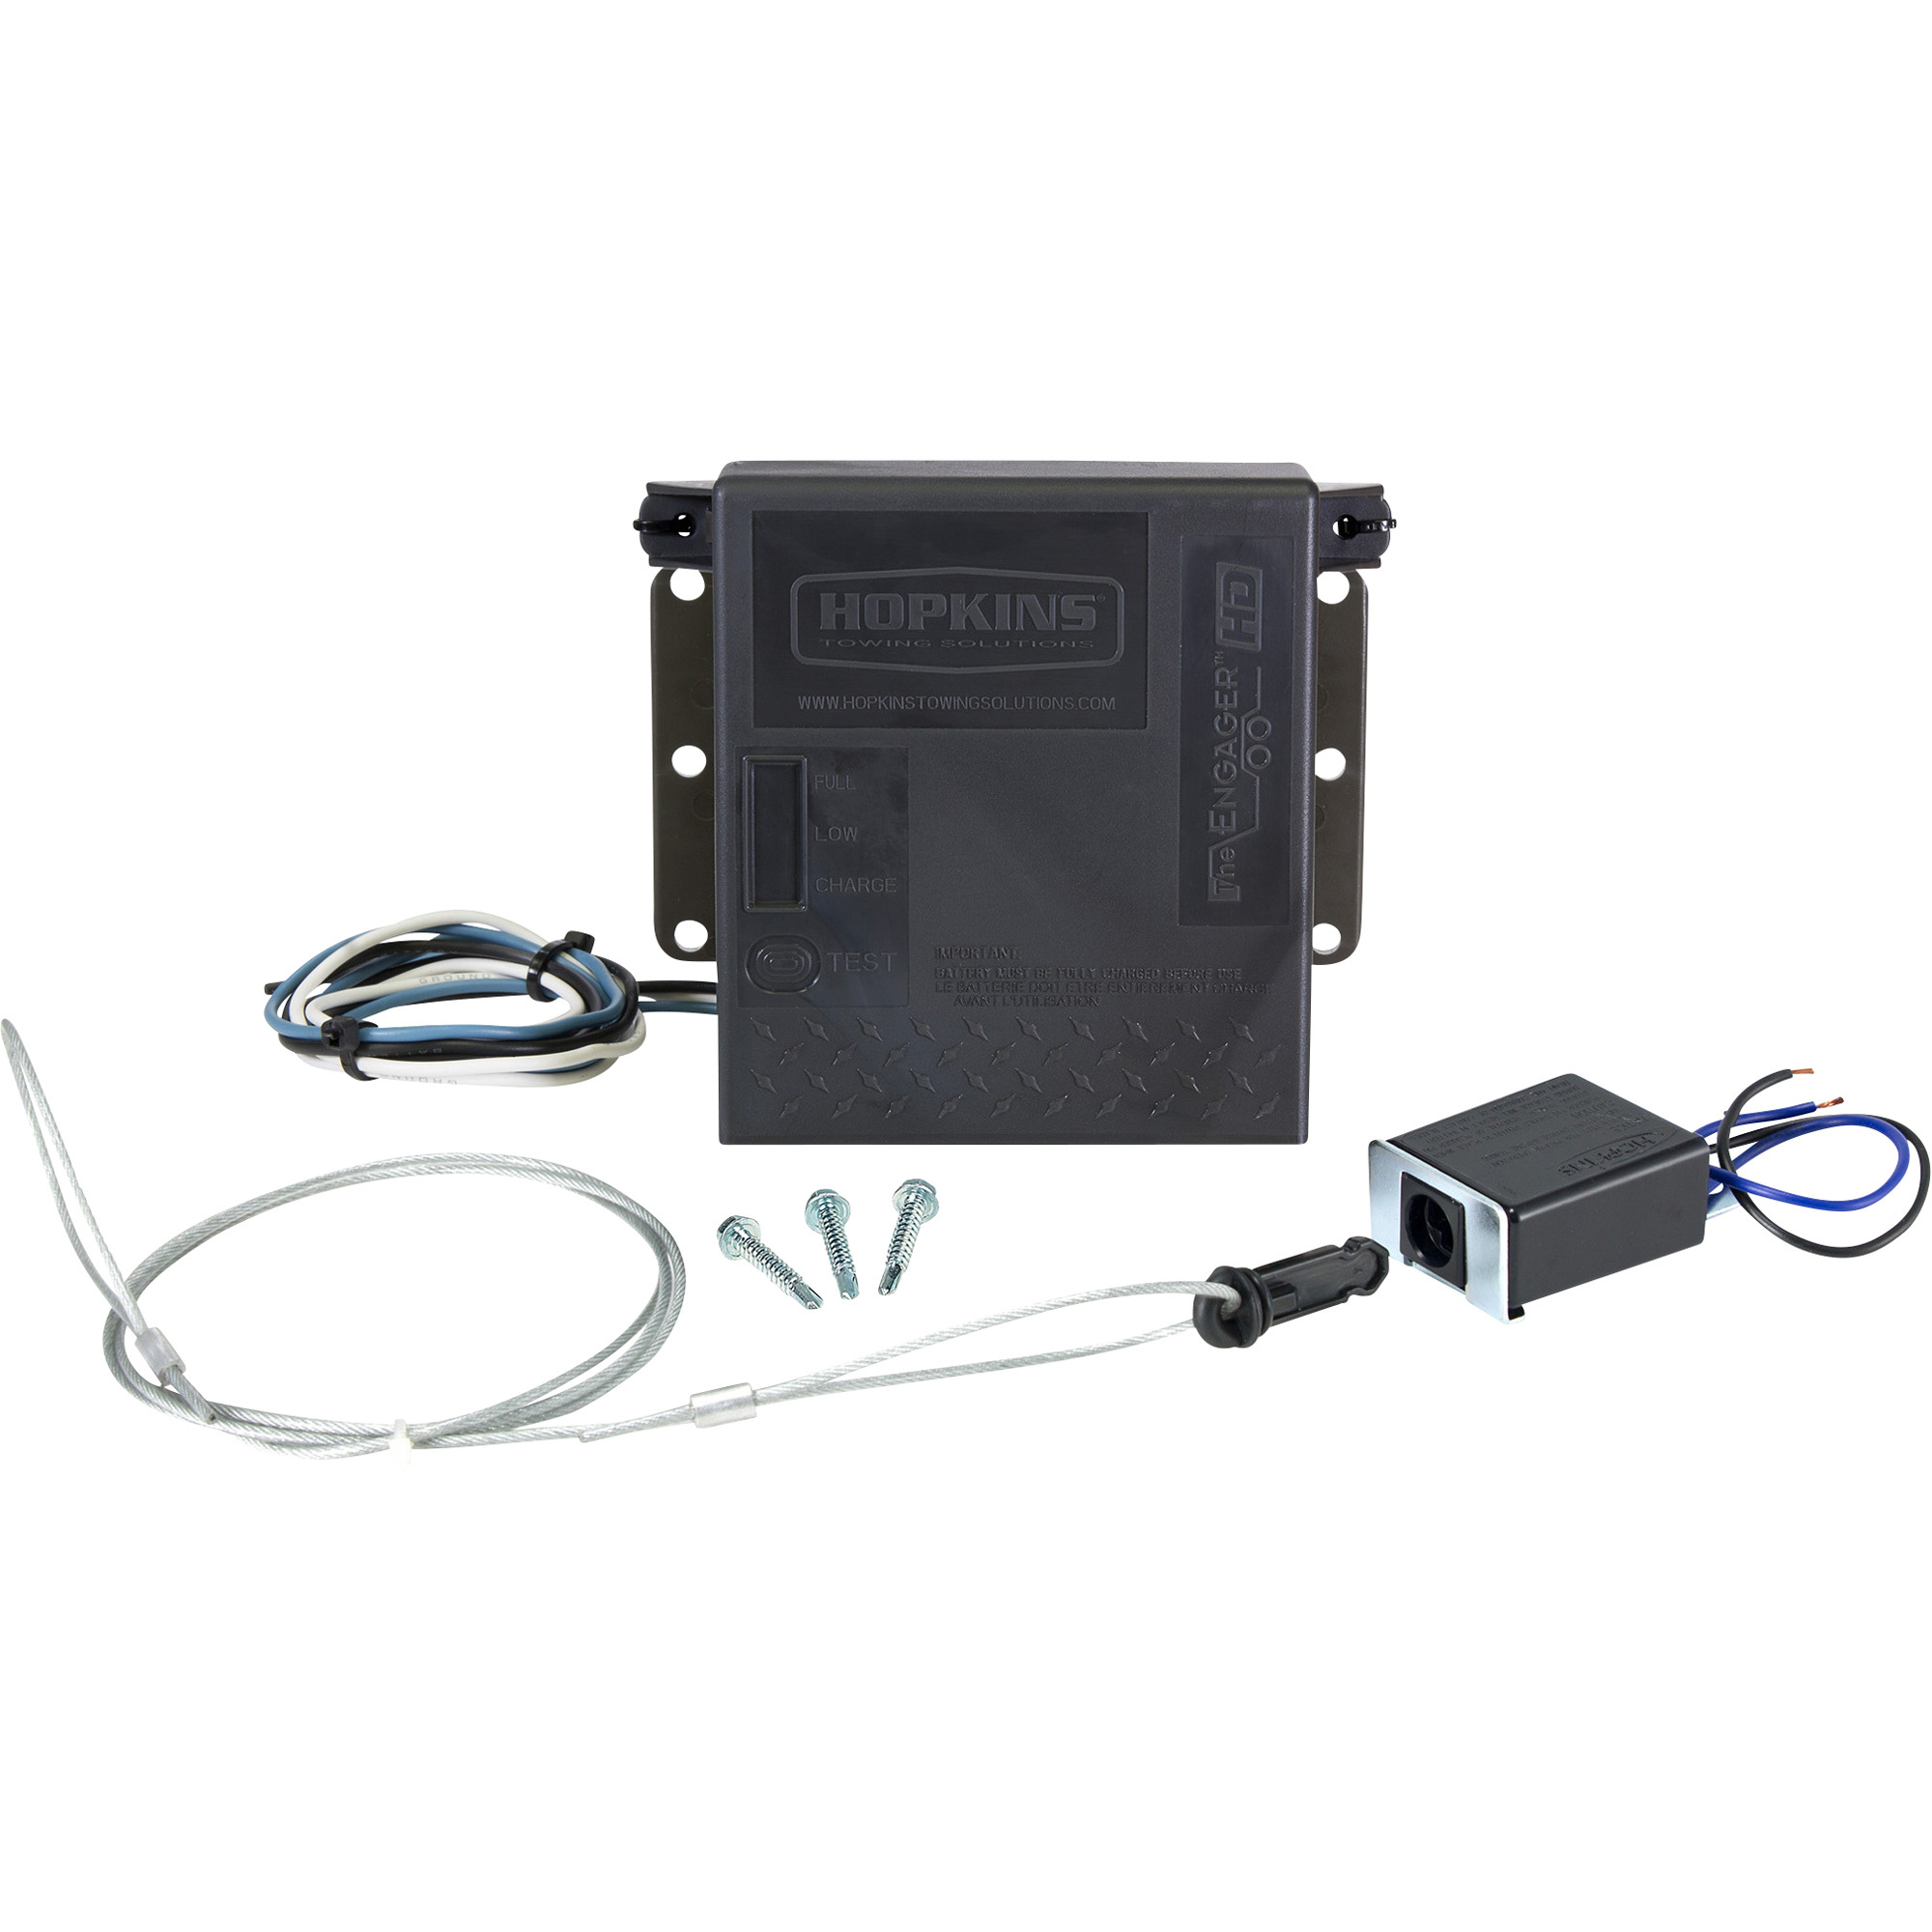 Hopkins Towing Solutions Engager Breakaway Kit with LED Test Light, Model 20099